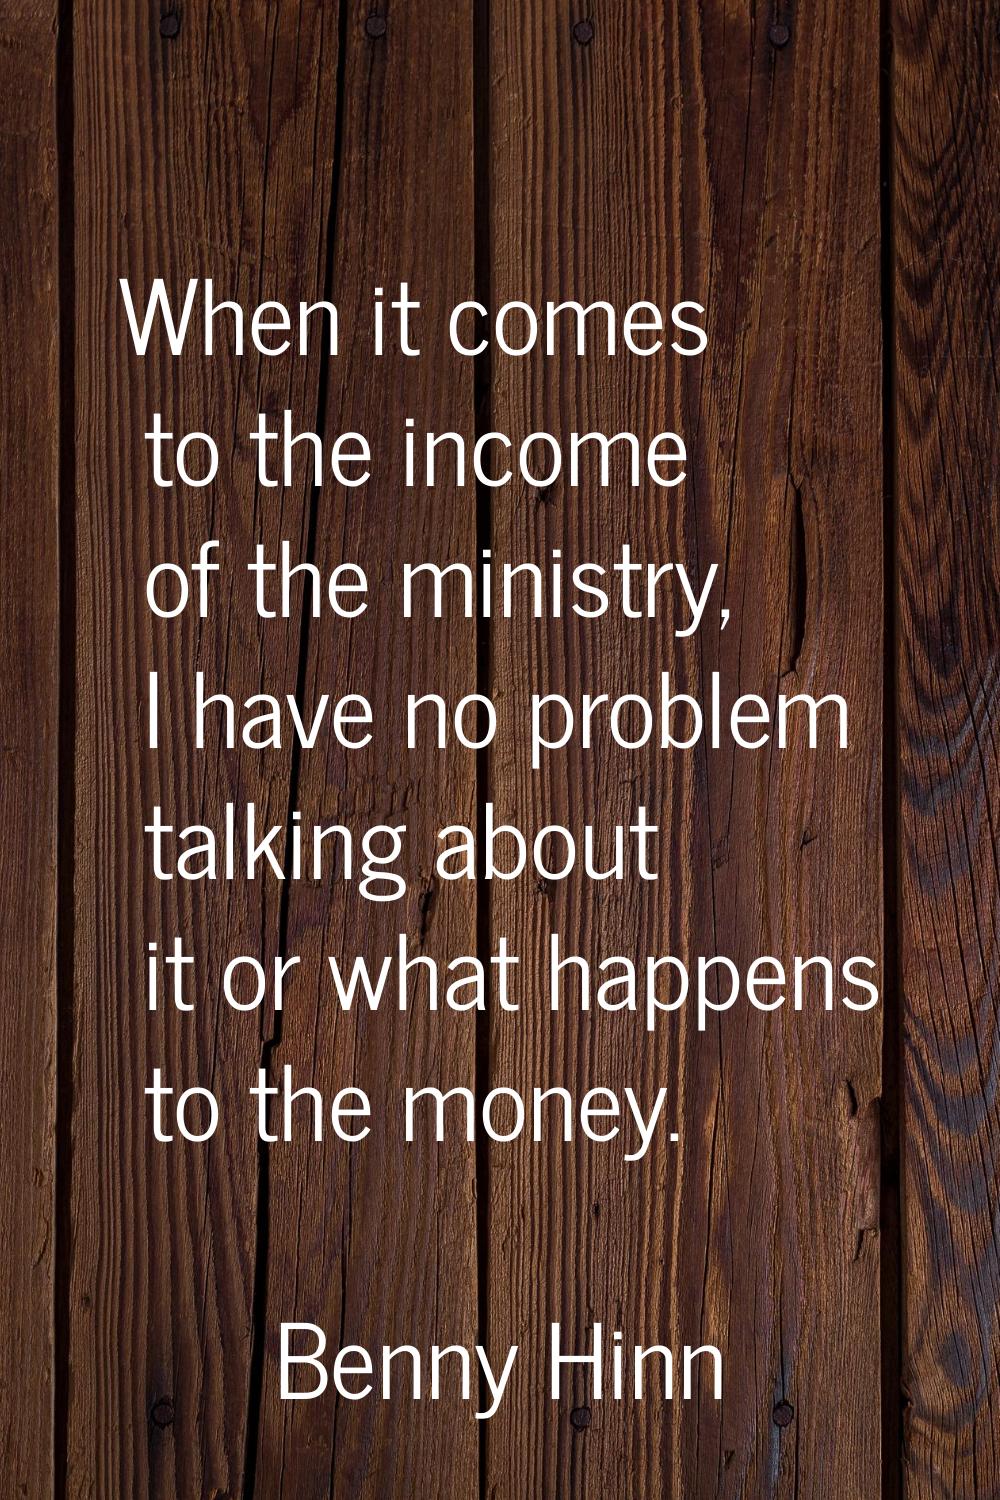 When it comes to the income of the ministry, I have no problem talking about it or what happens to 